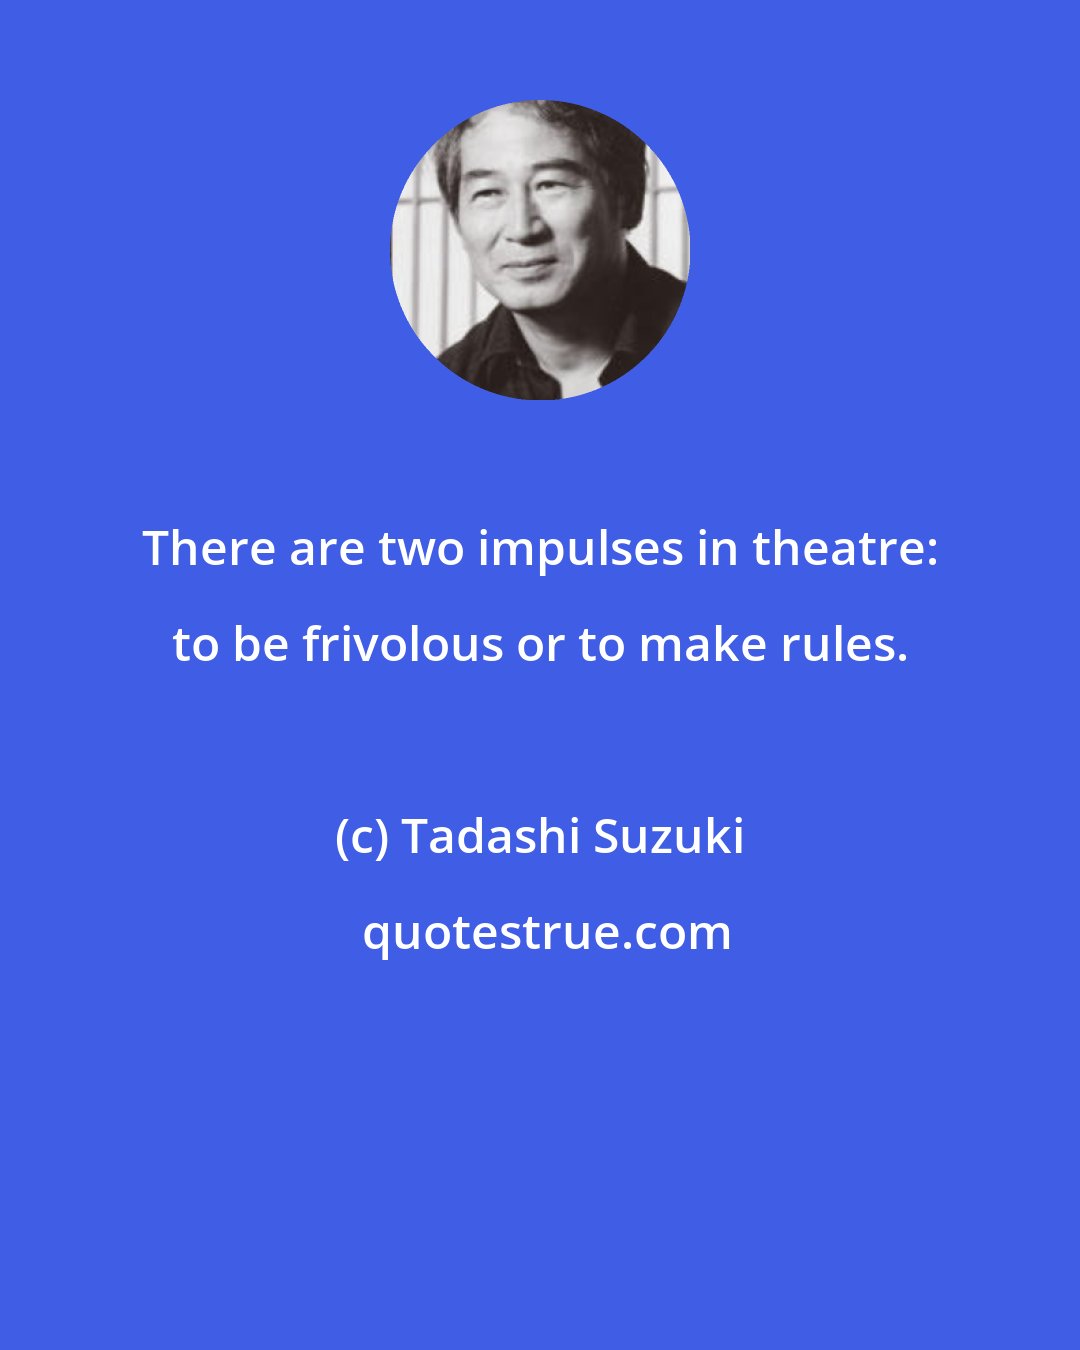 Tadashi Suzuki: There are two impulses in theatre: to be frivolous or to make rules.